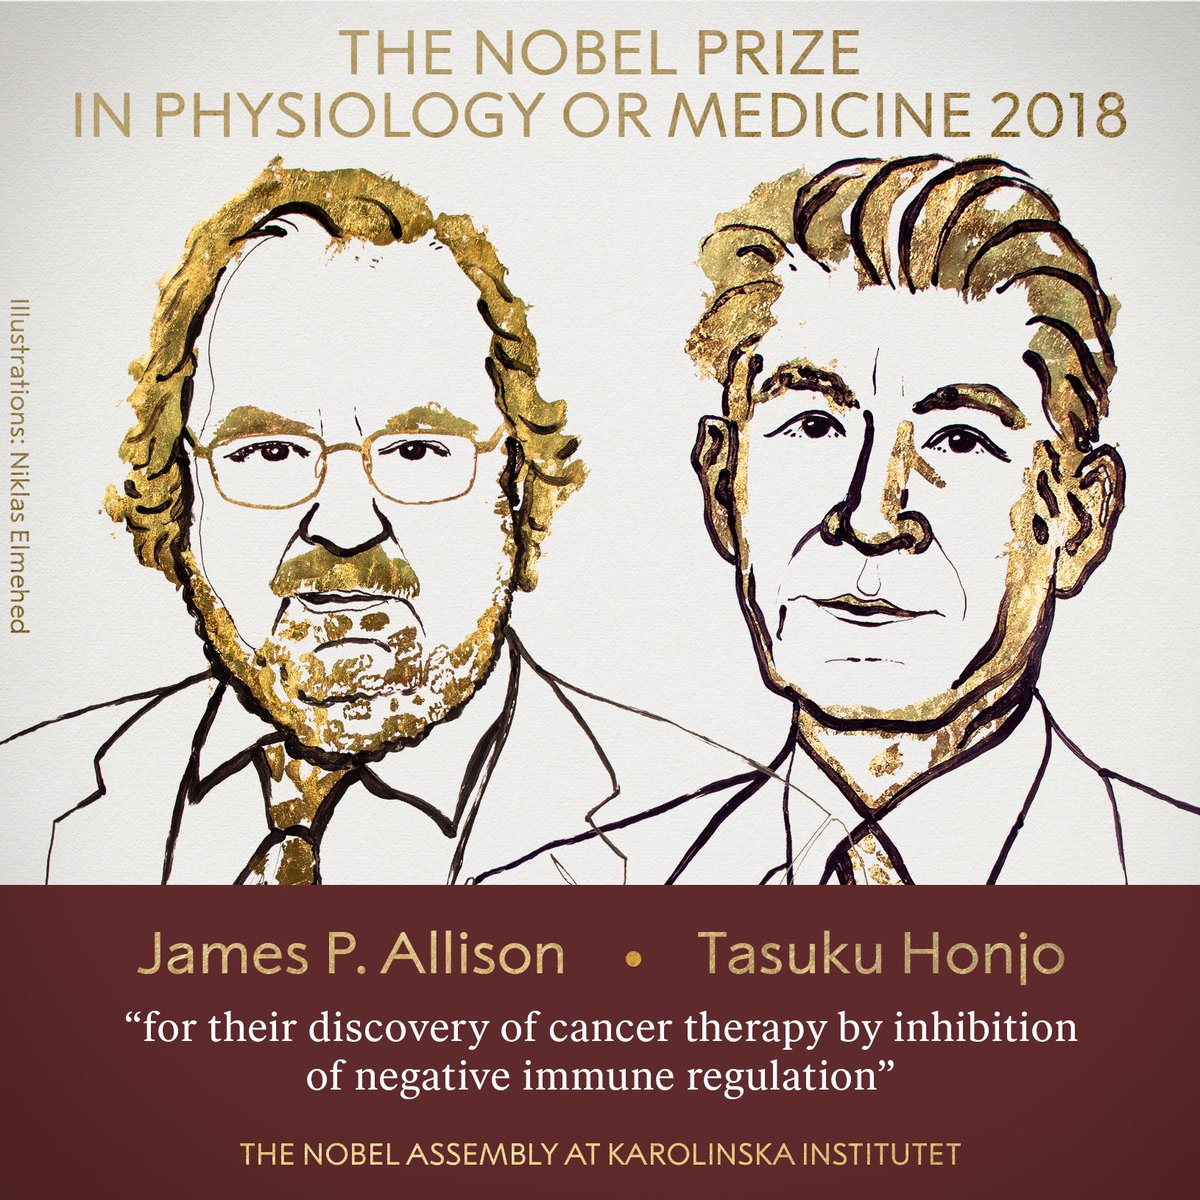 BREAKING NEWS
The 2018 #NobelPrize in Physiology or Medicine has been awarded jointly to James P. Allison and Tasuku Honjo “for their discovery of cancer therapy by inhibition of negative immune regulation.”